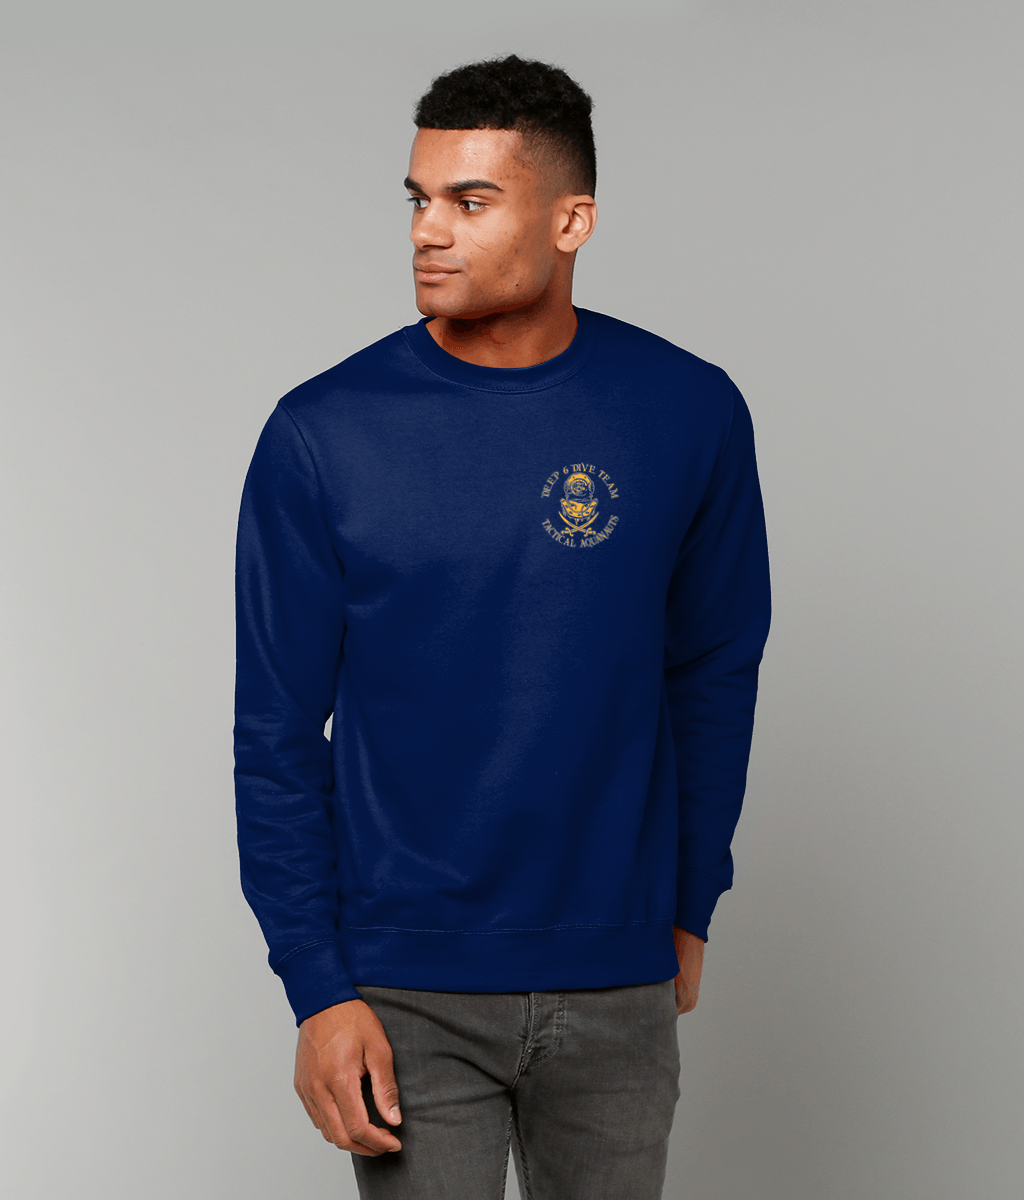 Deep 6 Dive Team - SweatShirt (01) (Printed Front and Back)